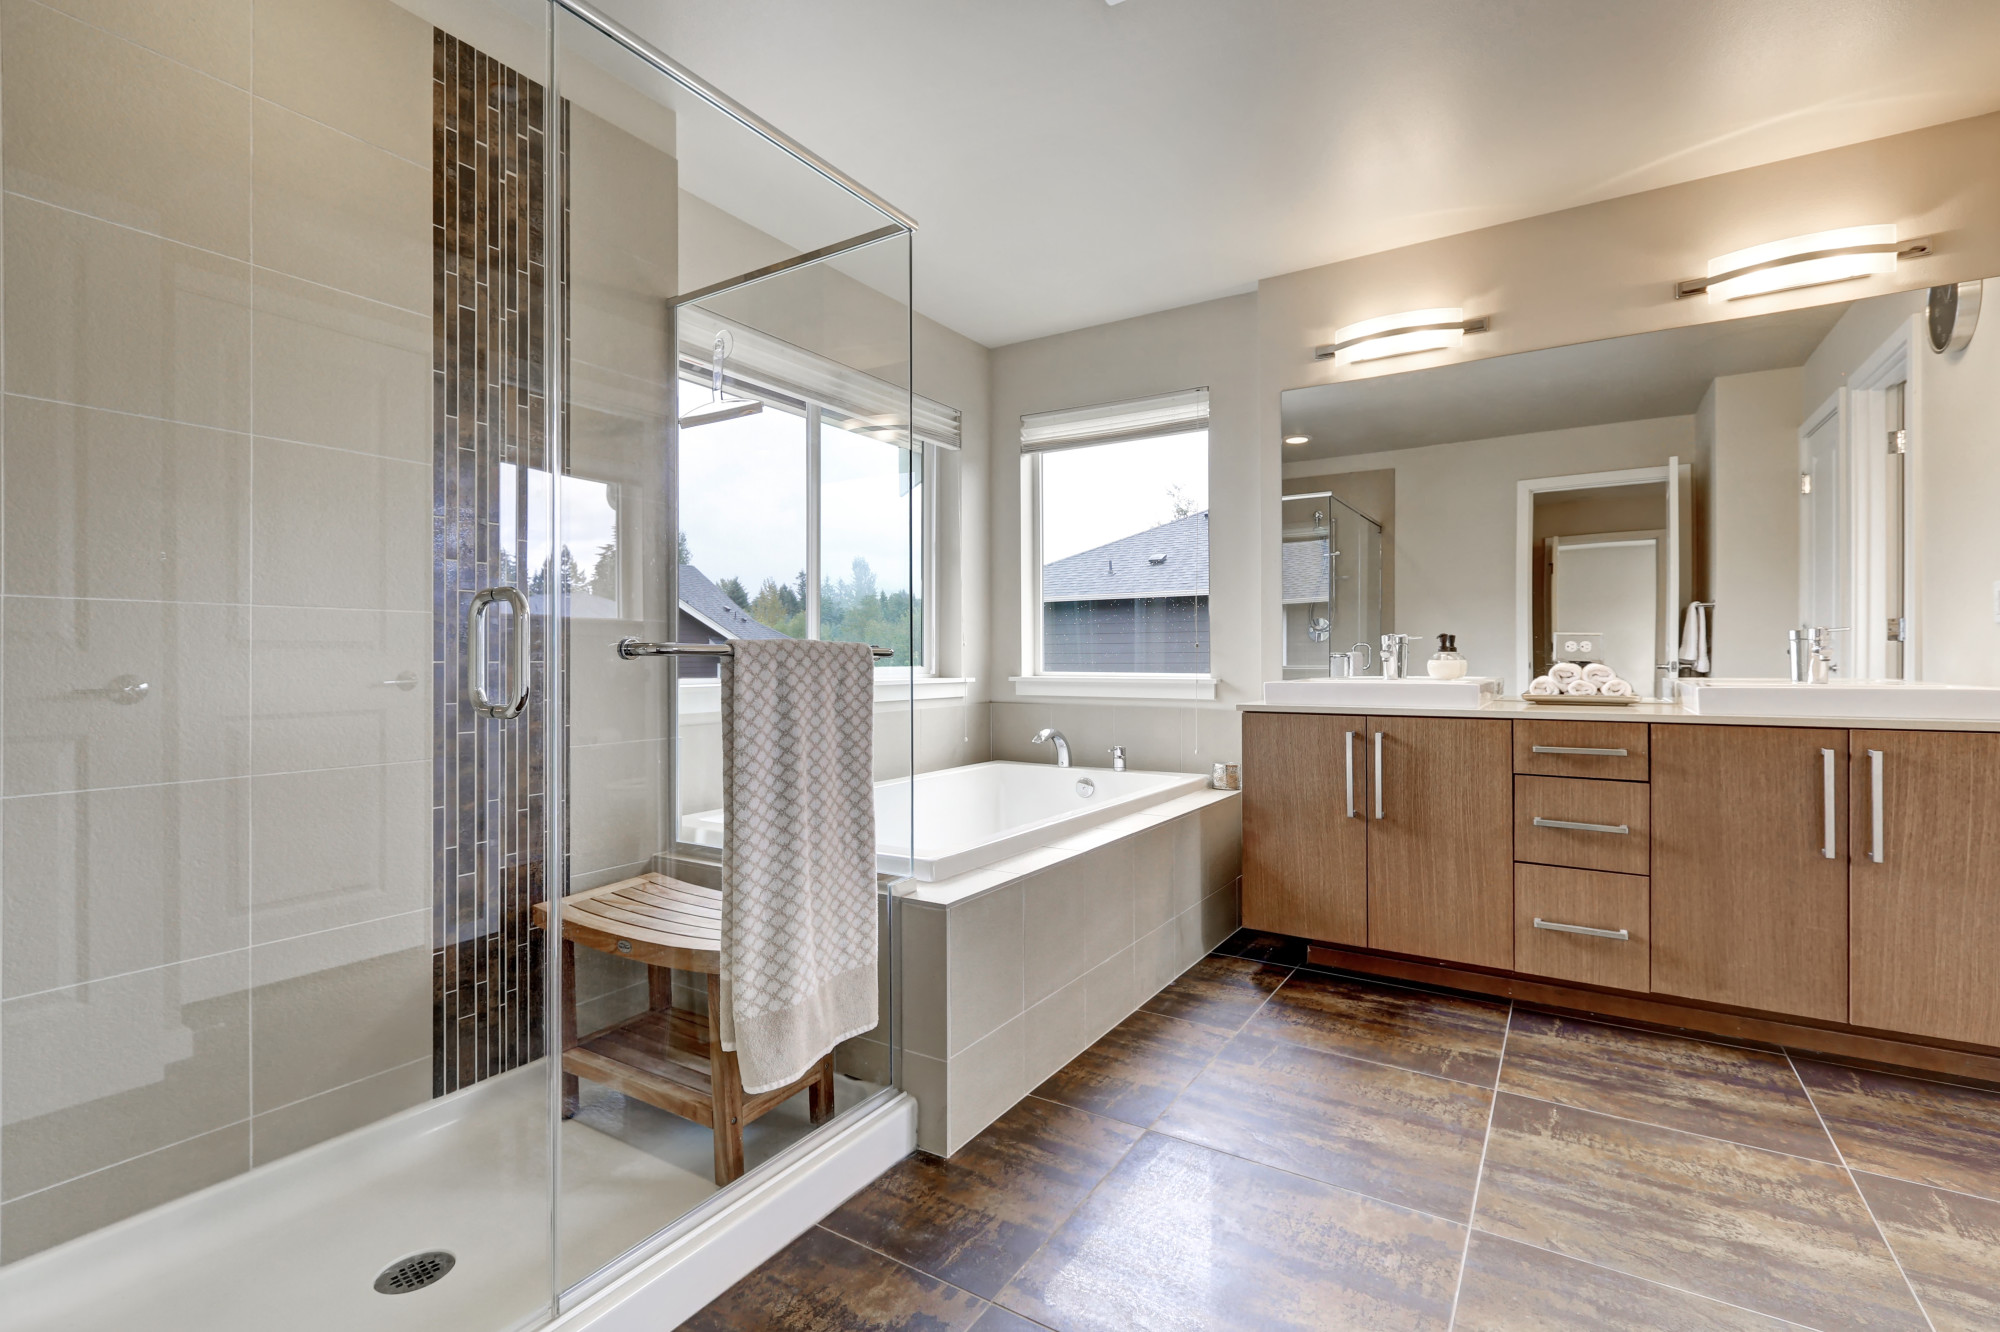 More Than a Beautiful Tub: 6 Unexpected Benefits of Getting a Walk-In Tub